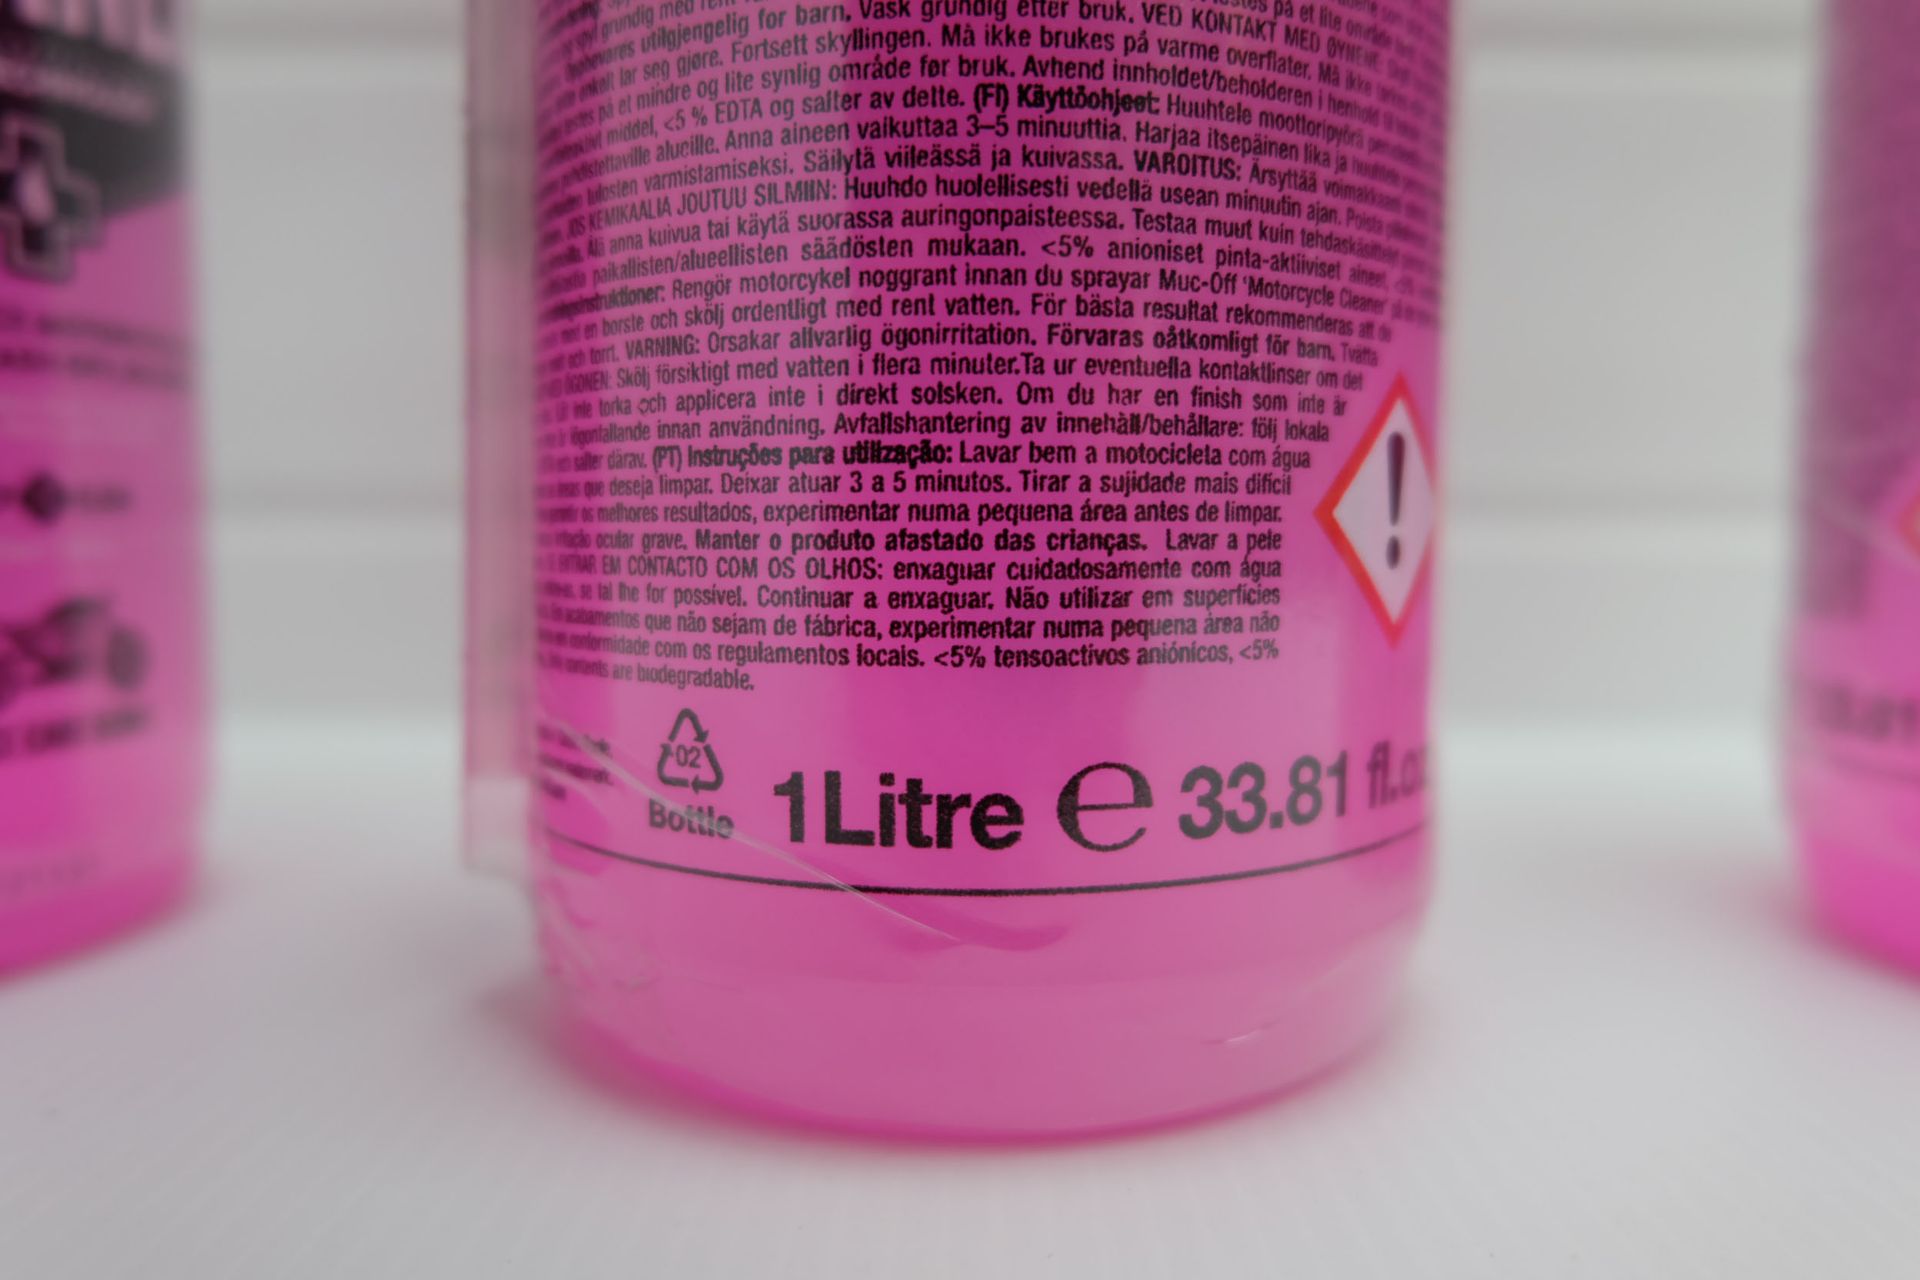 3 x Muc-Off Motorcycle Cleaner 1 Litre - Image 3 of 3